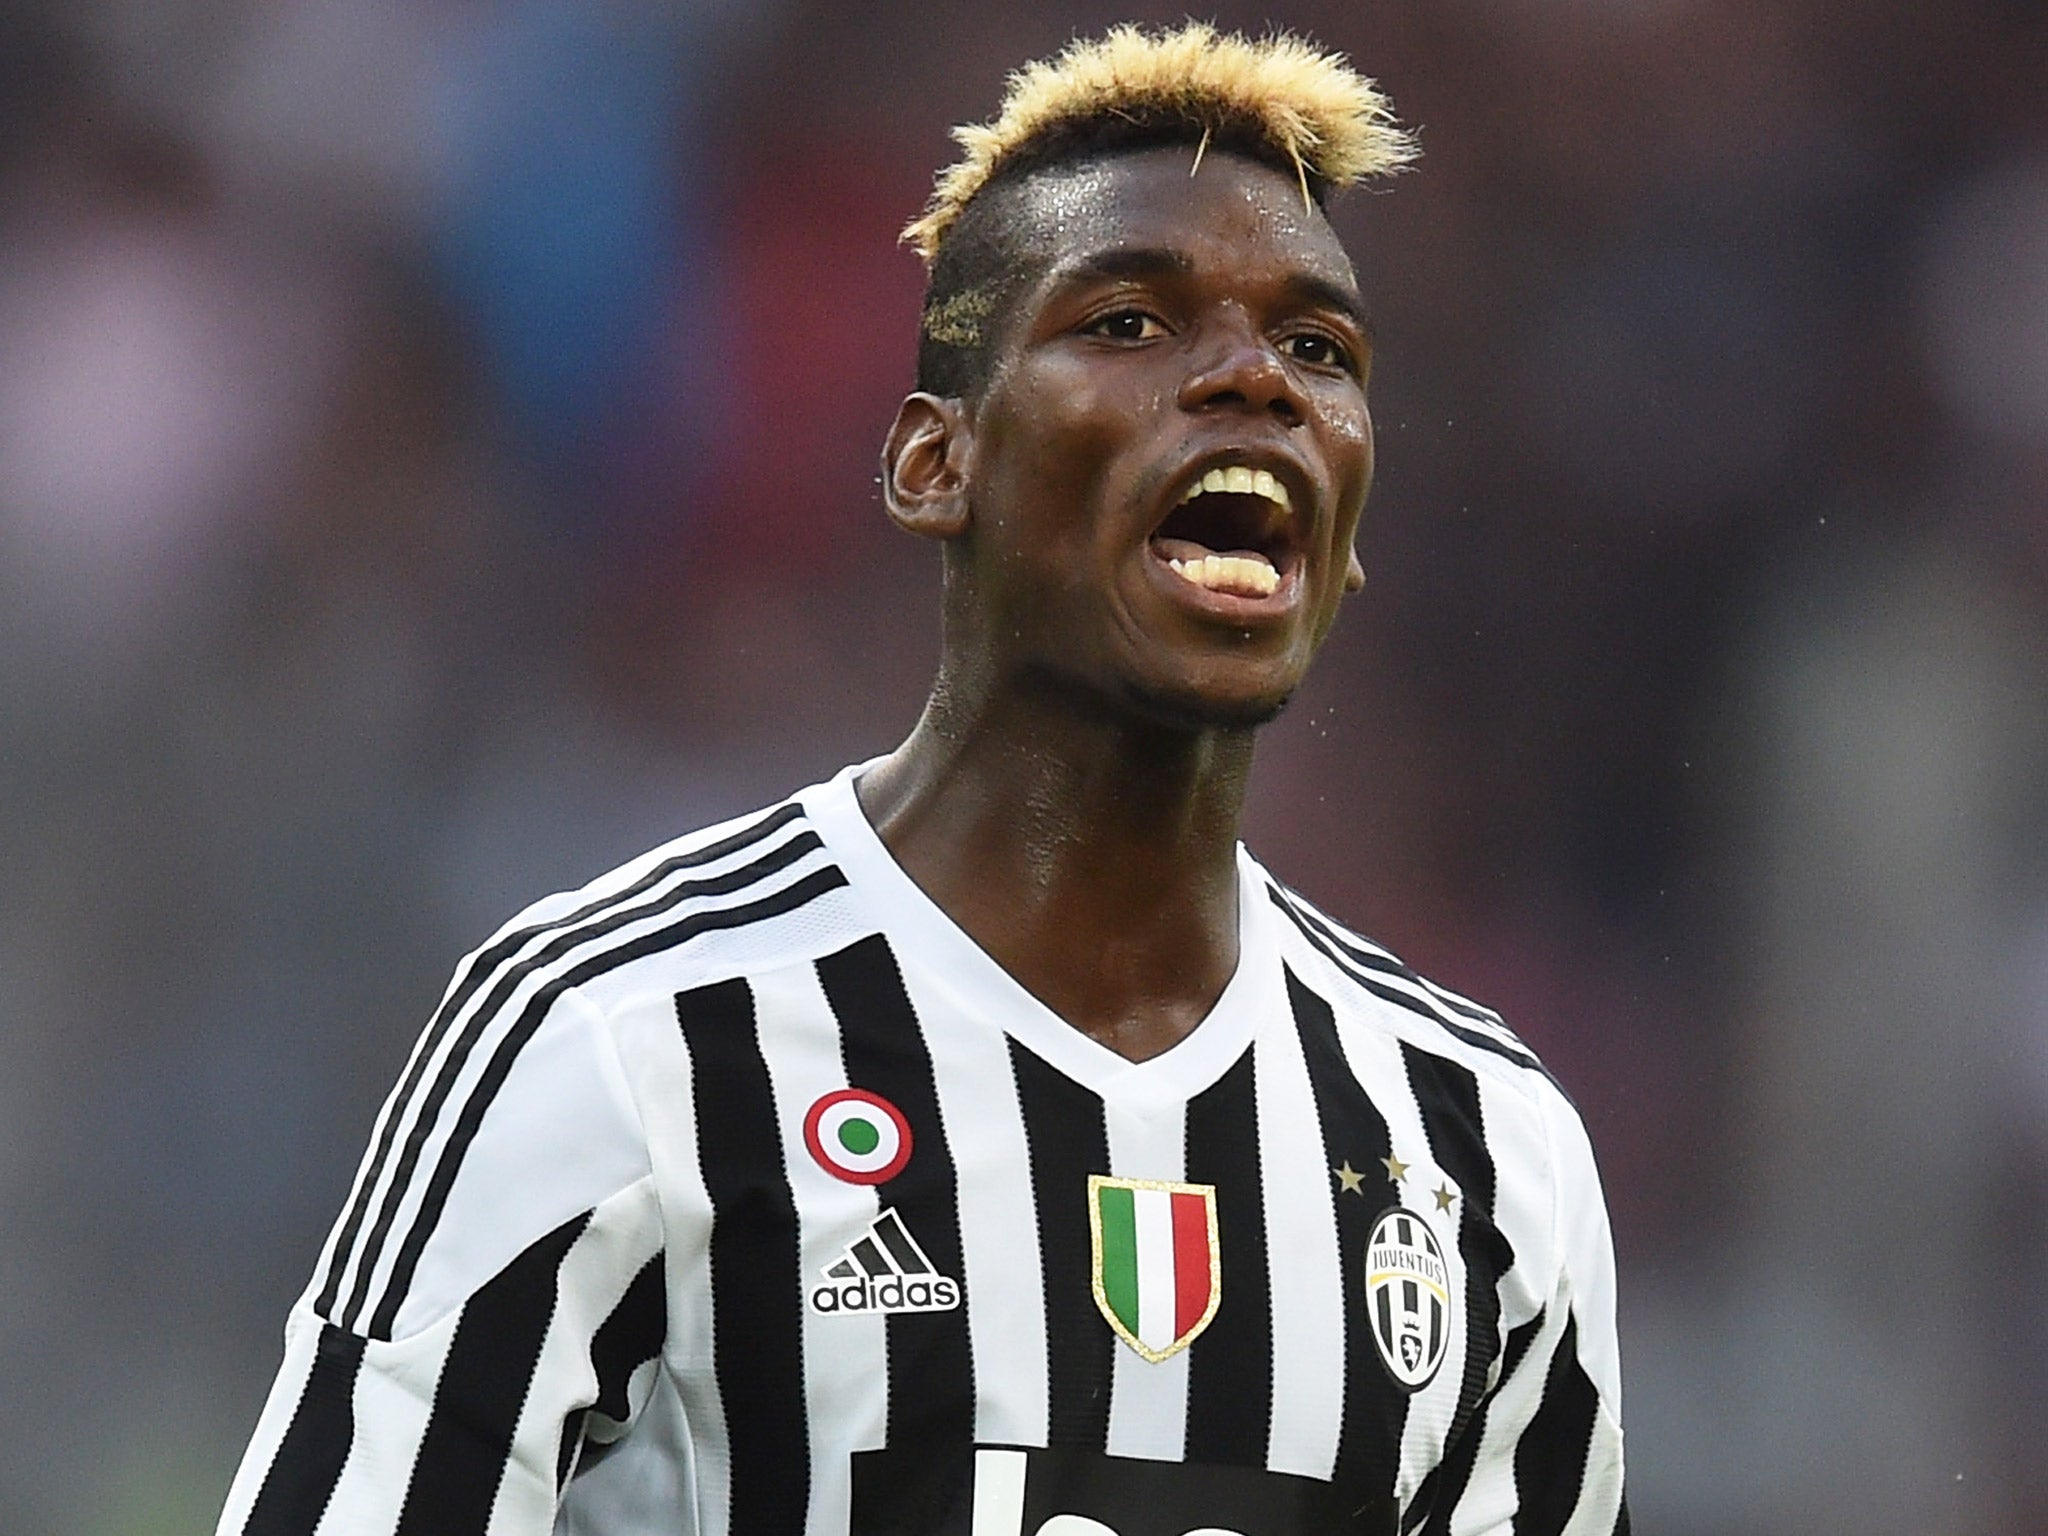 Pogba could join Eden Hazard as Chelsea’s top earners